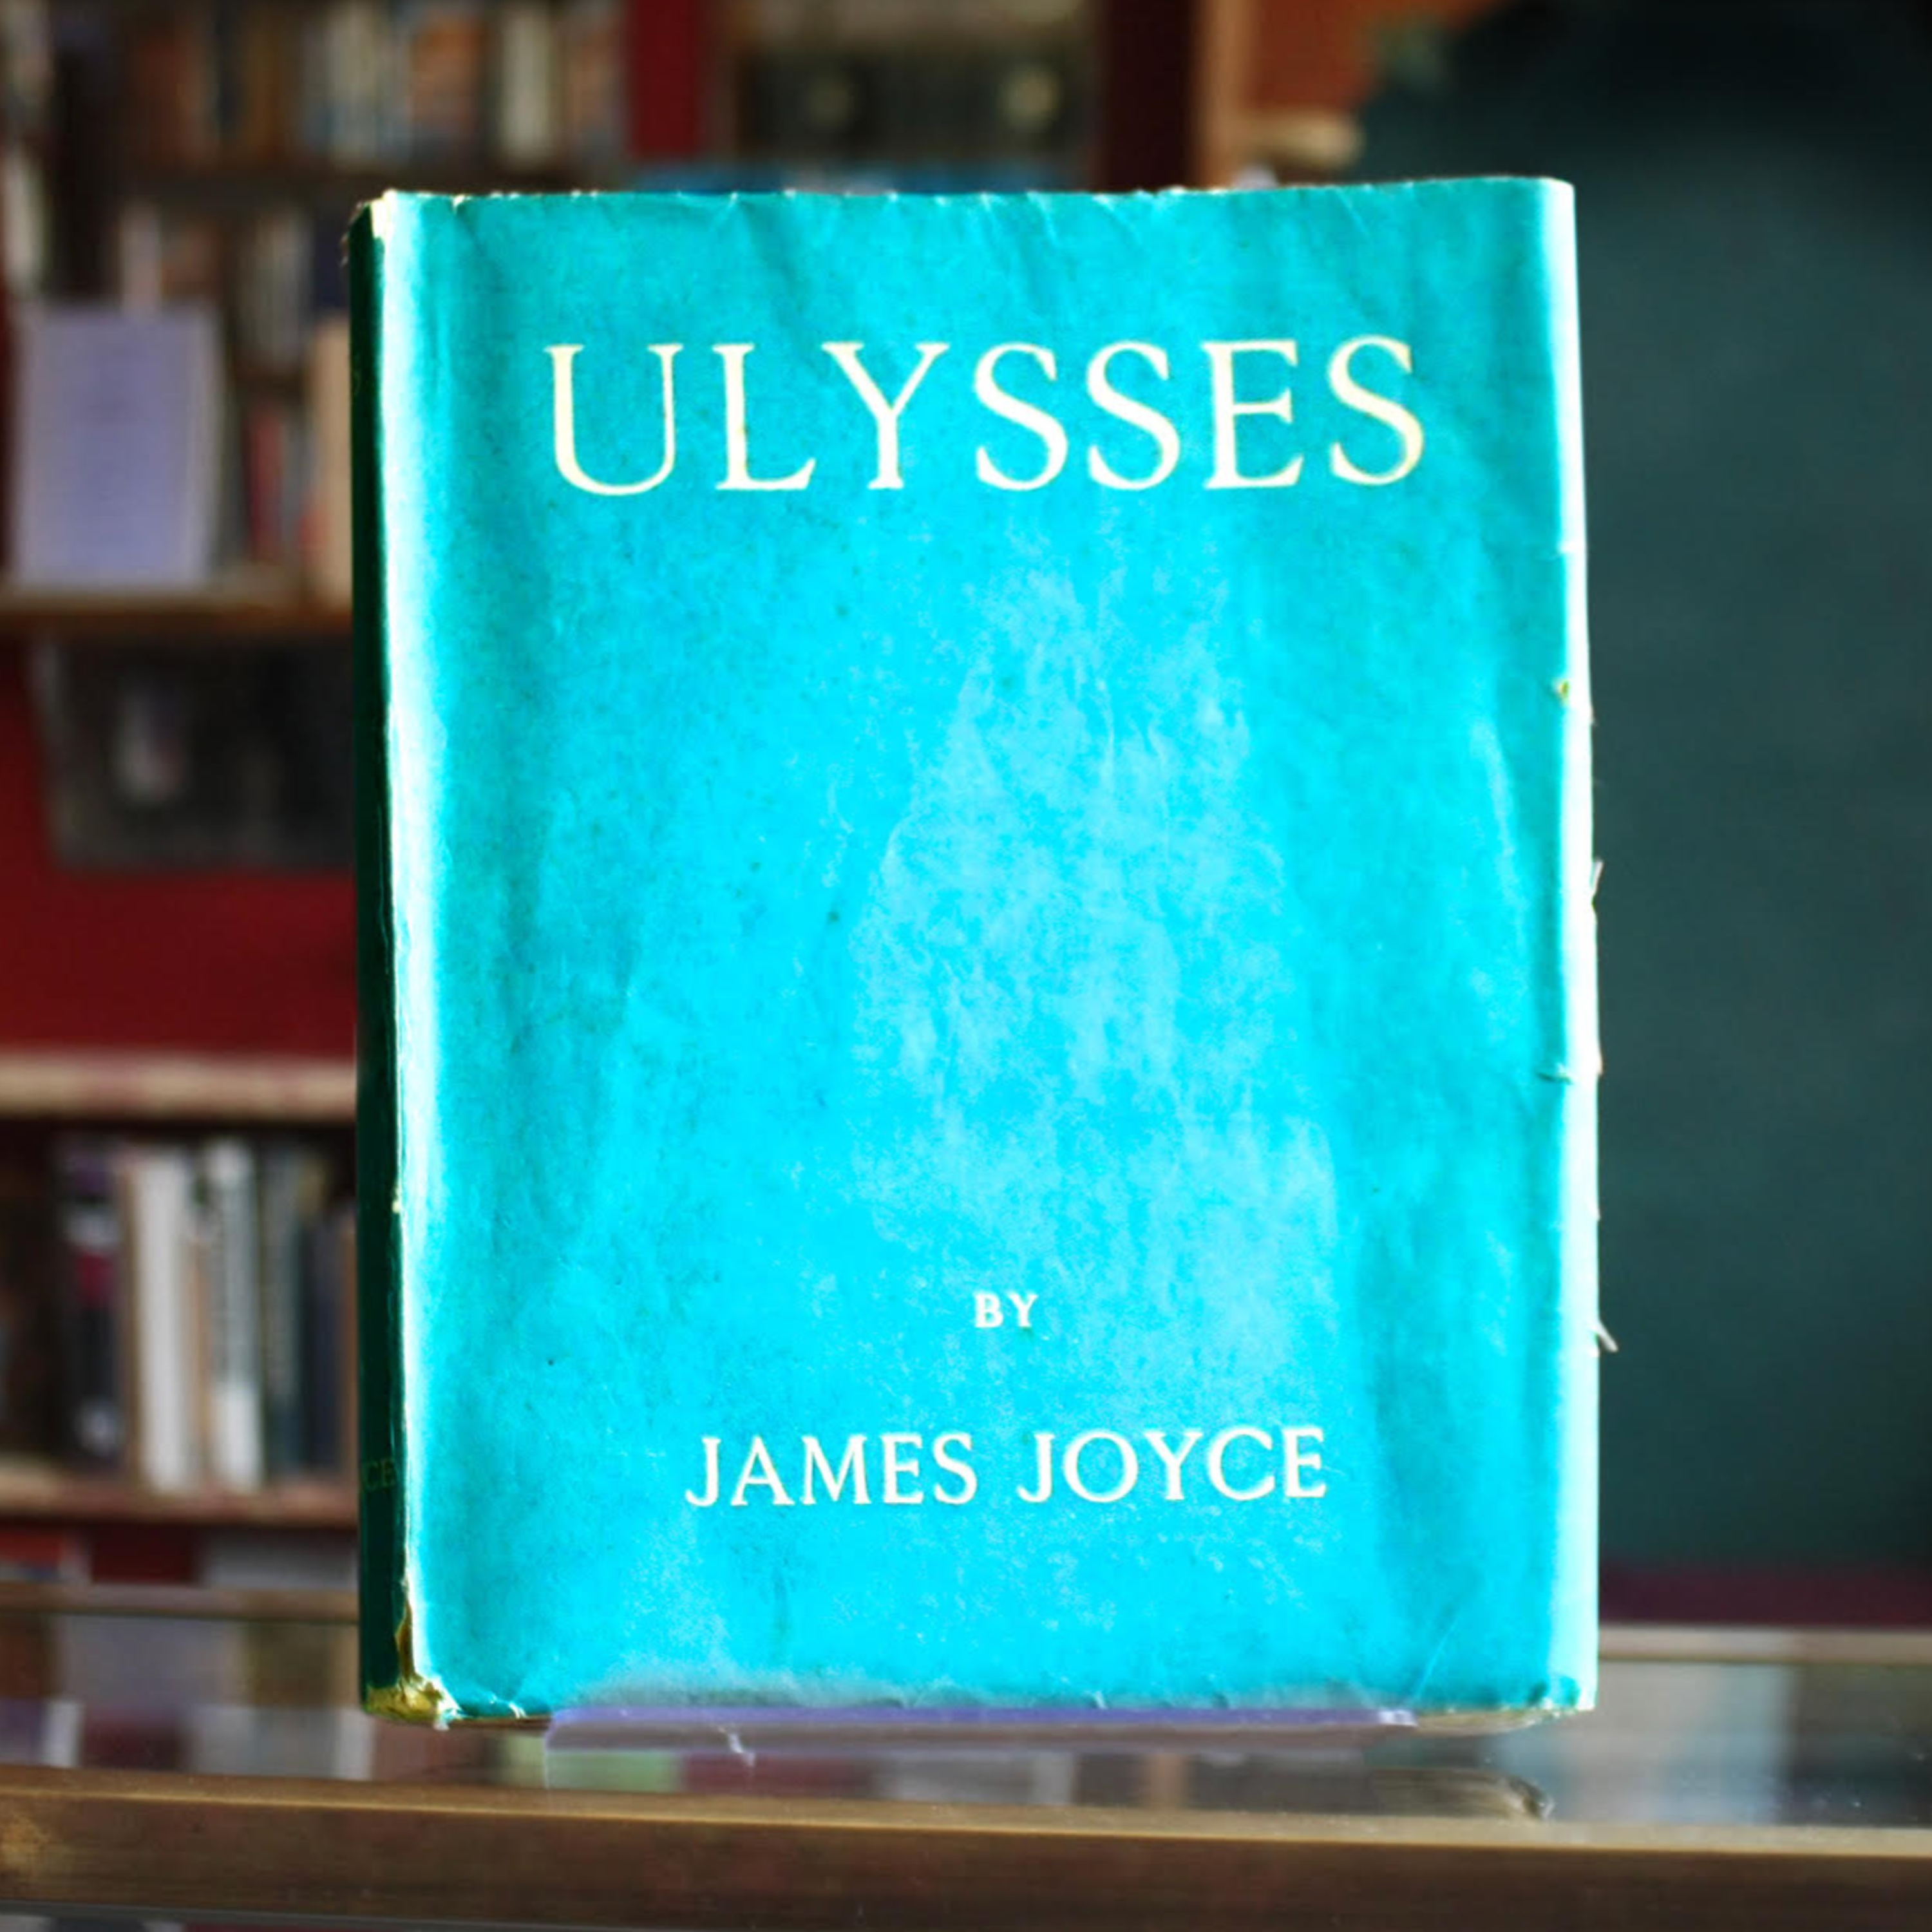 Introducing Friends of Shakespeare and Company read Ulysses